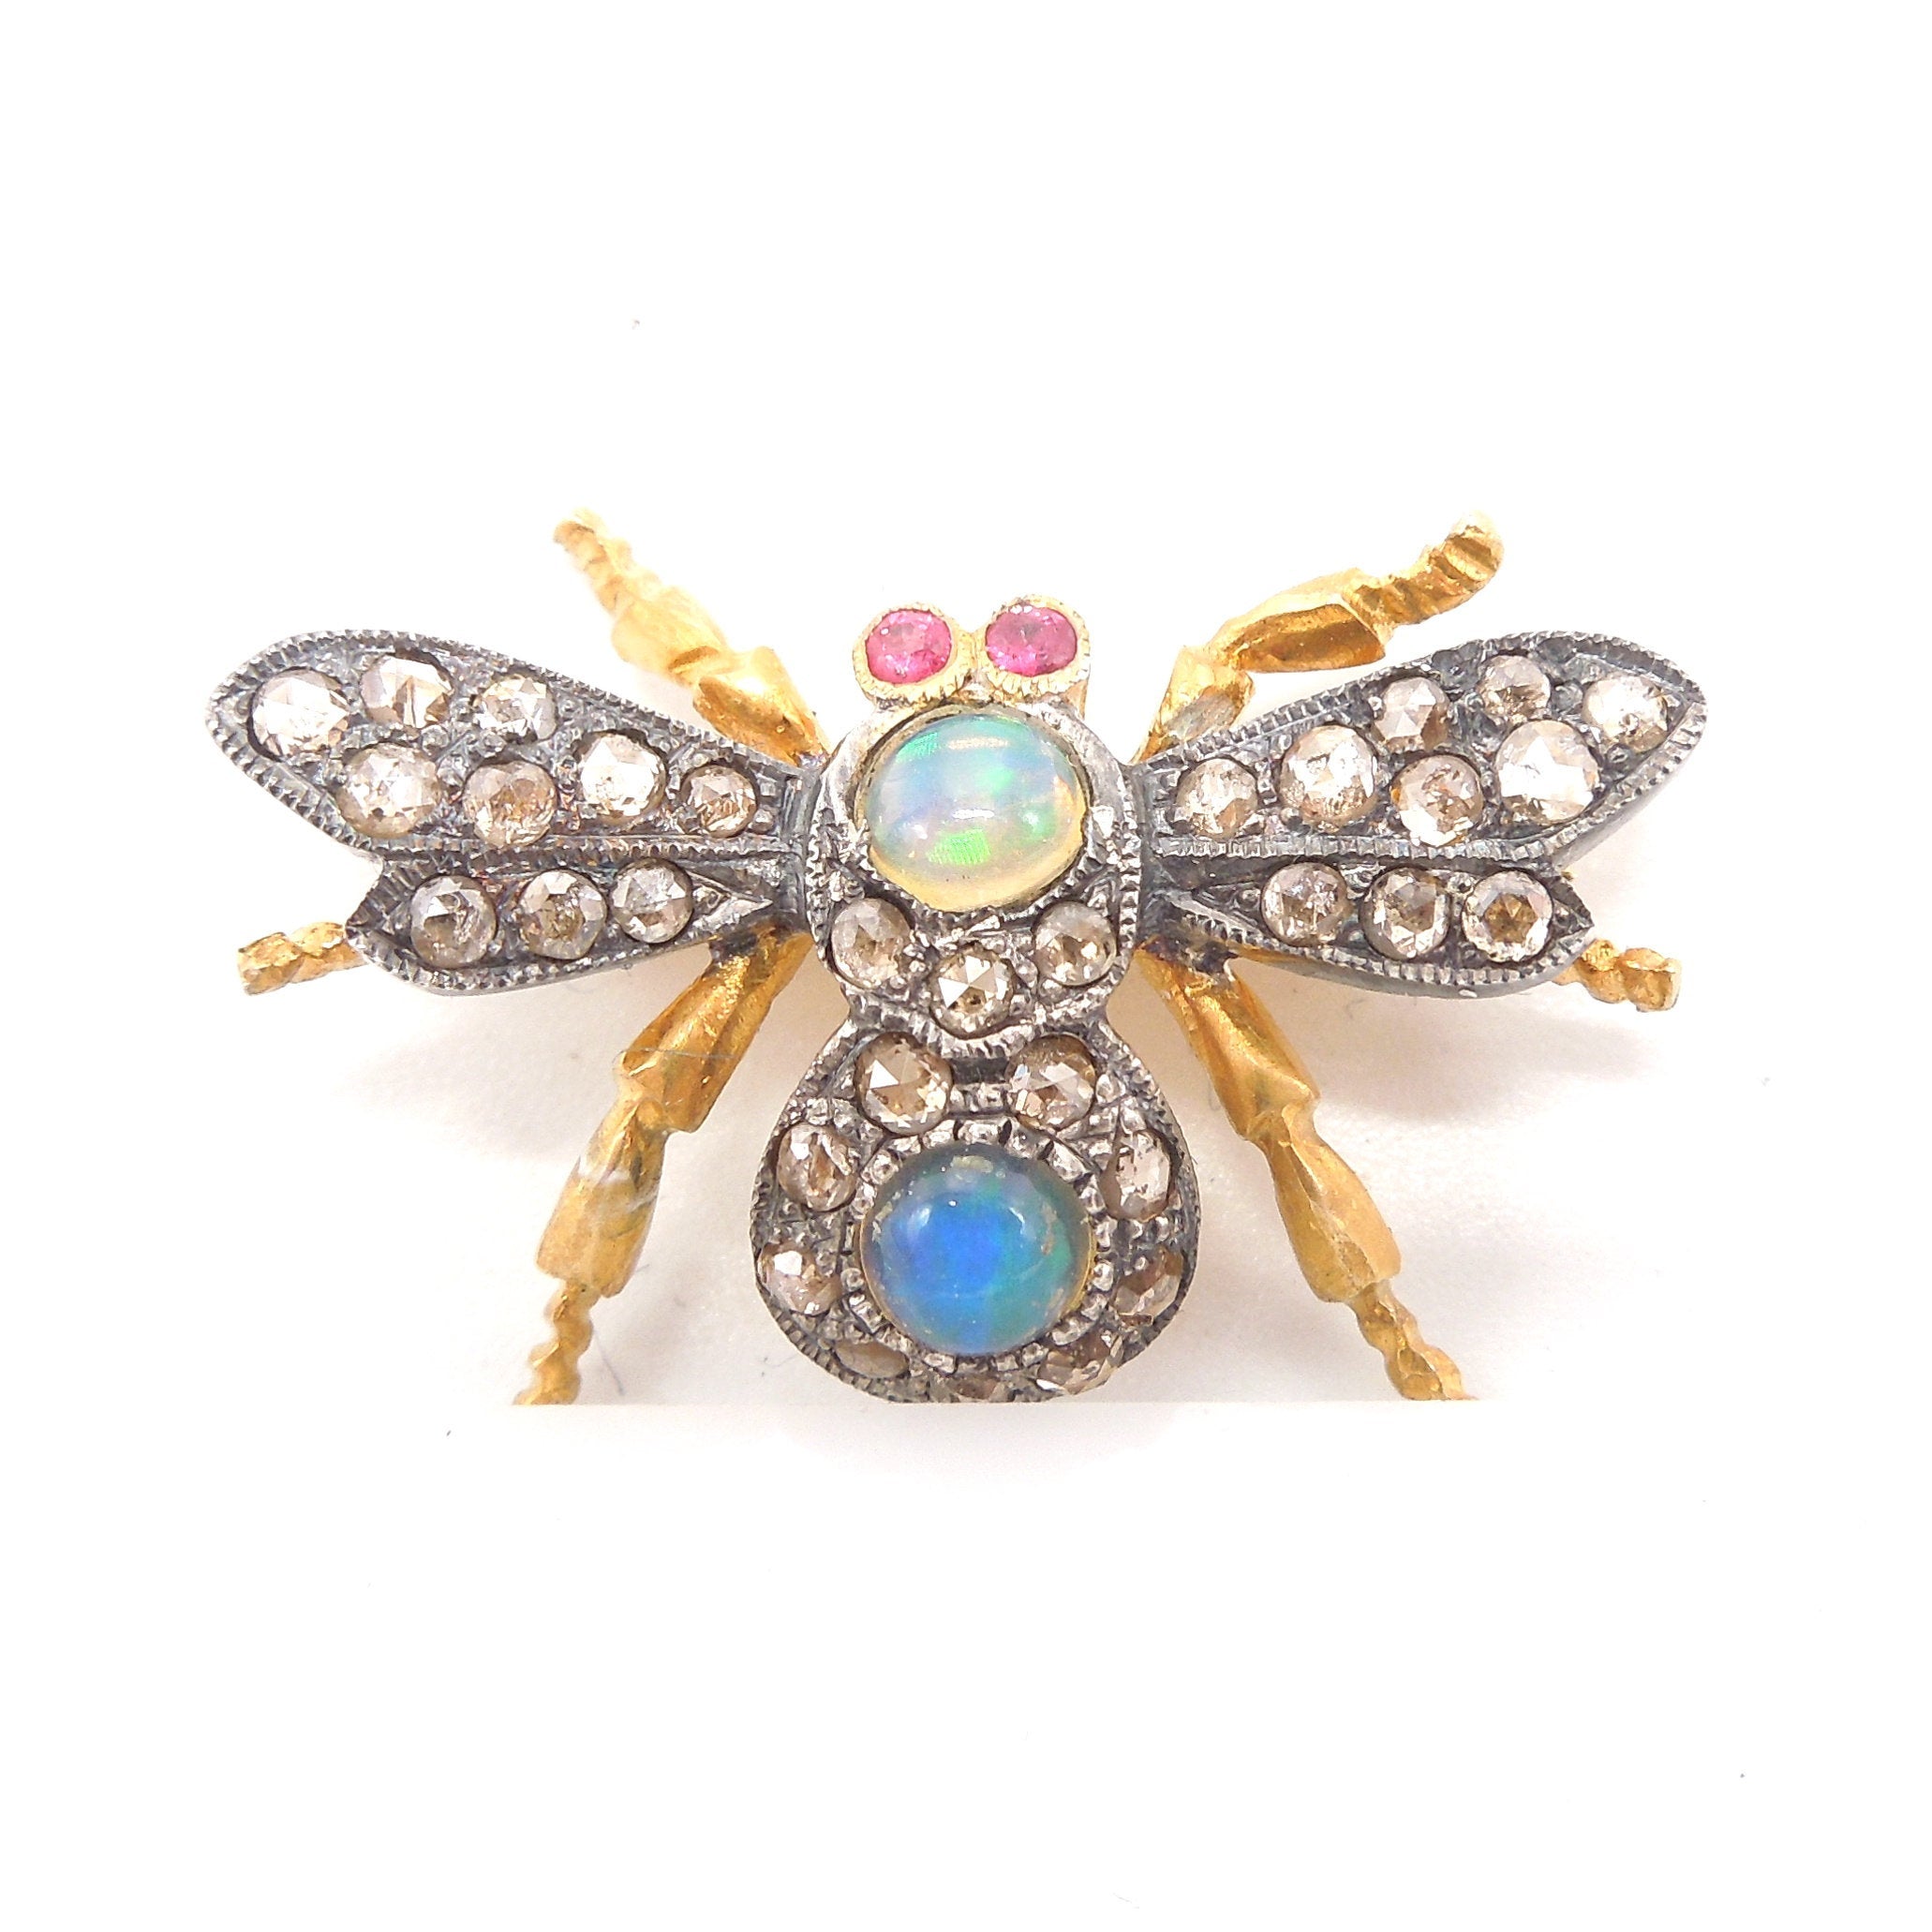 Pair of Gilded and Oxidized Sterling Silver Bee Pin/Pendants with Opals, Diamonds, and Sapphires